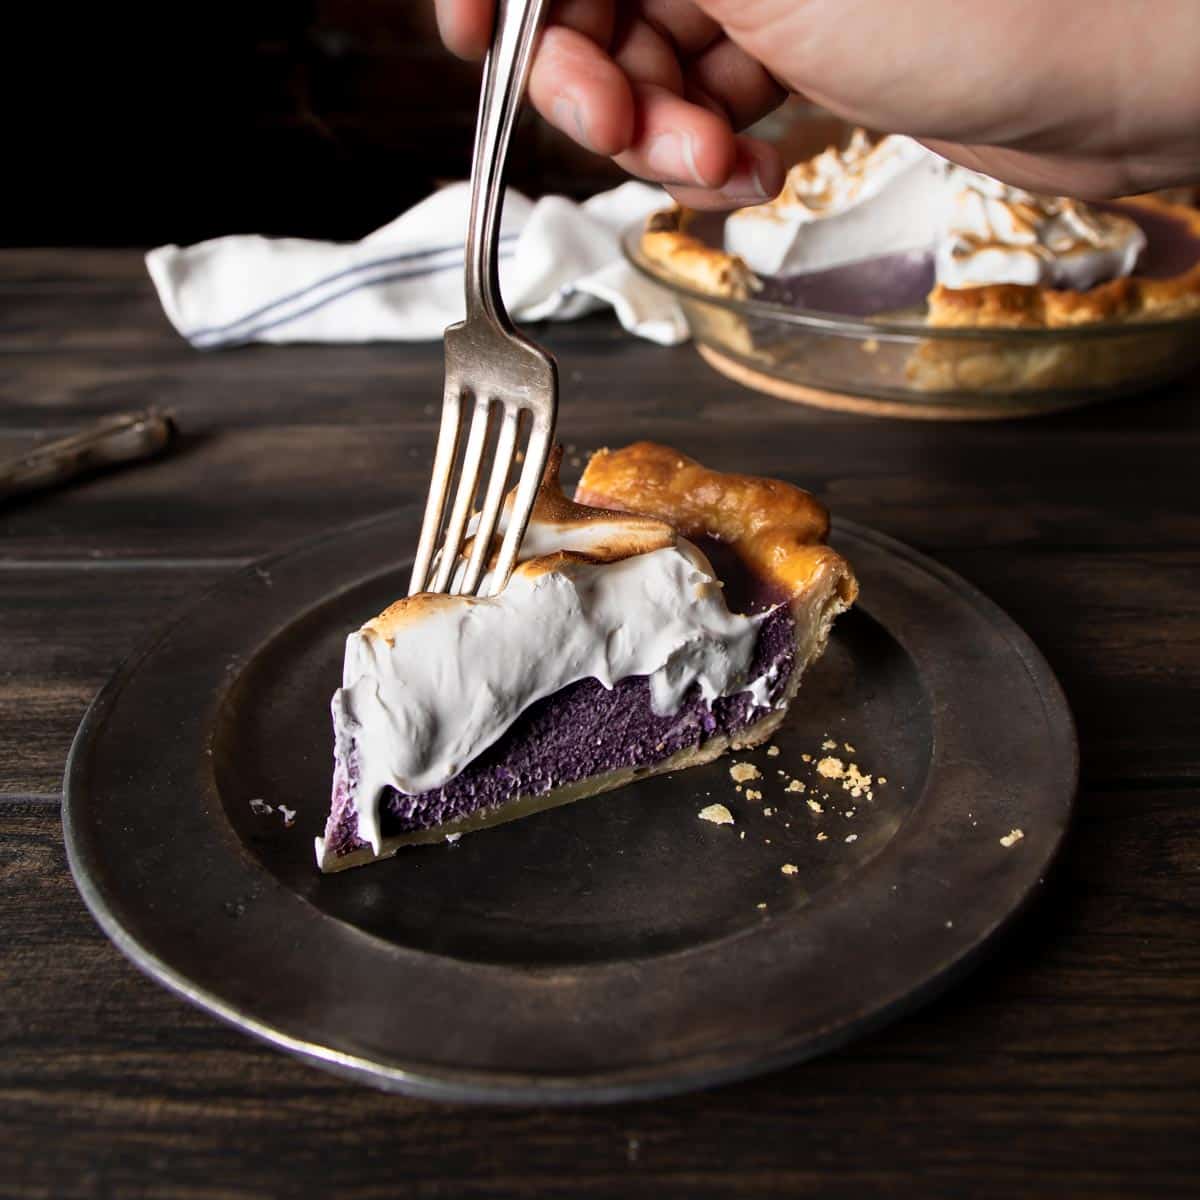 A hand holding a fork dipping into the first bite of purple sweet potato pie with Swiss meringue